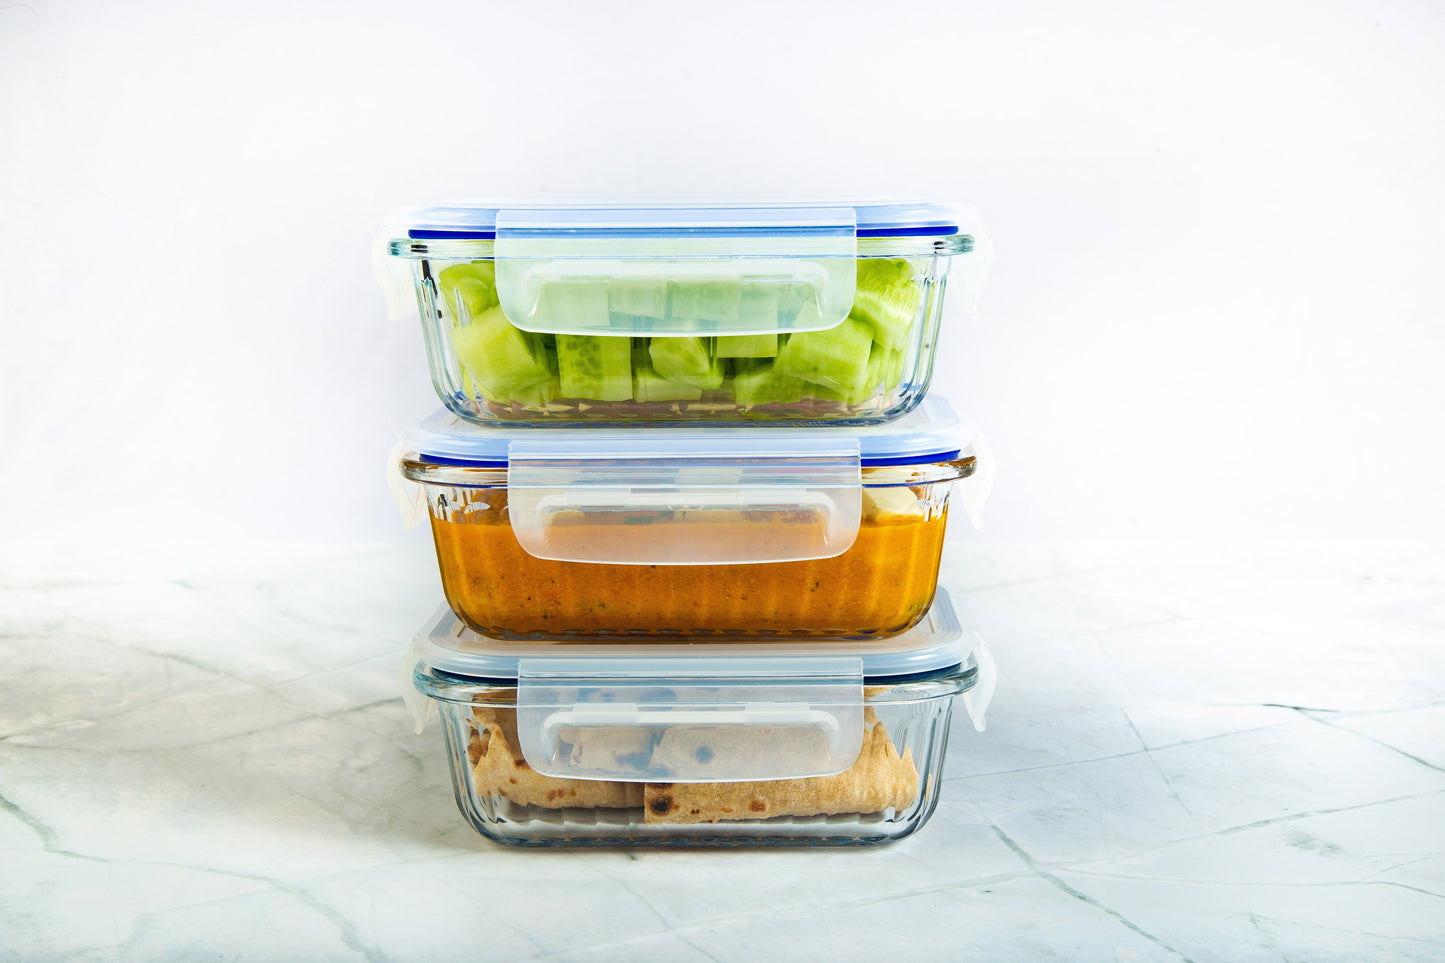 Truly Eco Air-Tight Oblong Borosilicate Glass Containers with Lid - Decor